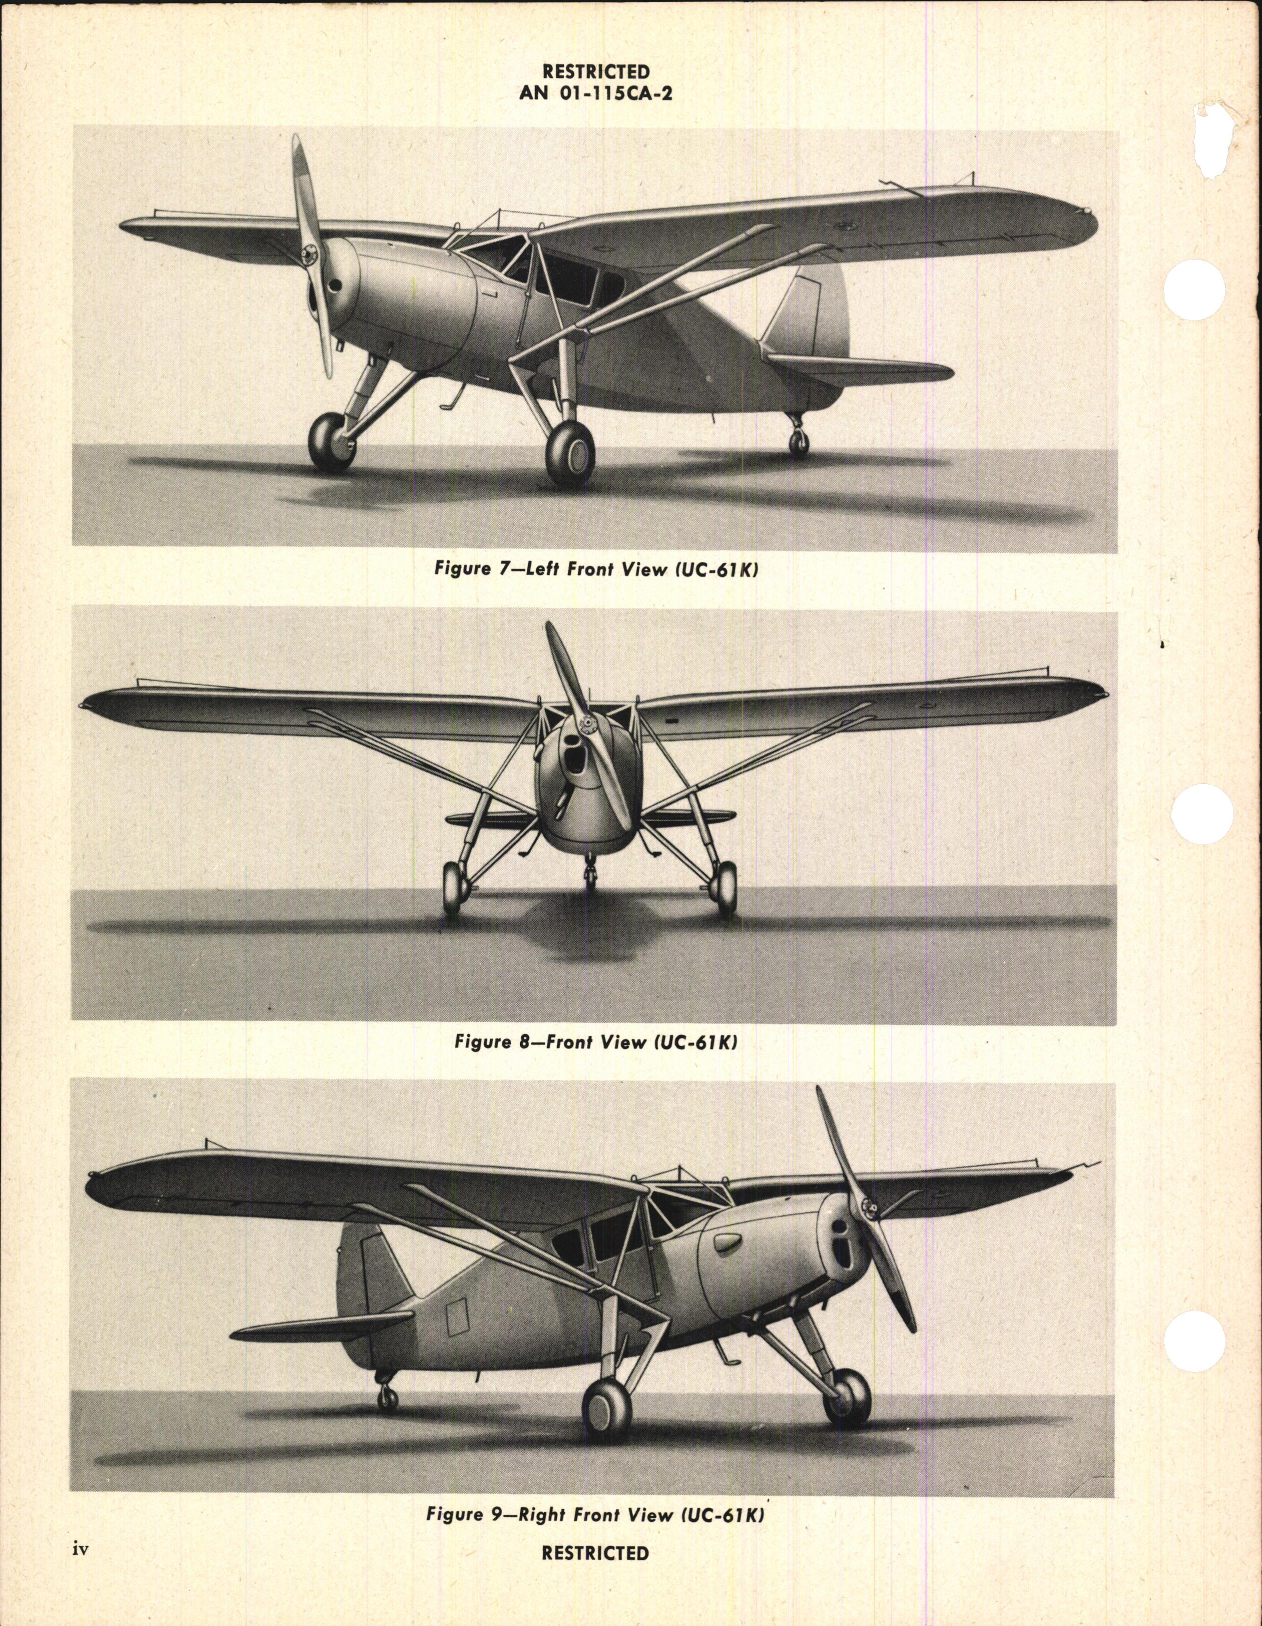 Sample page 6 from AirCorps Library document: Erection and Maintenance Instructions for UC-61, UC-61A, UC-61K, GK-1